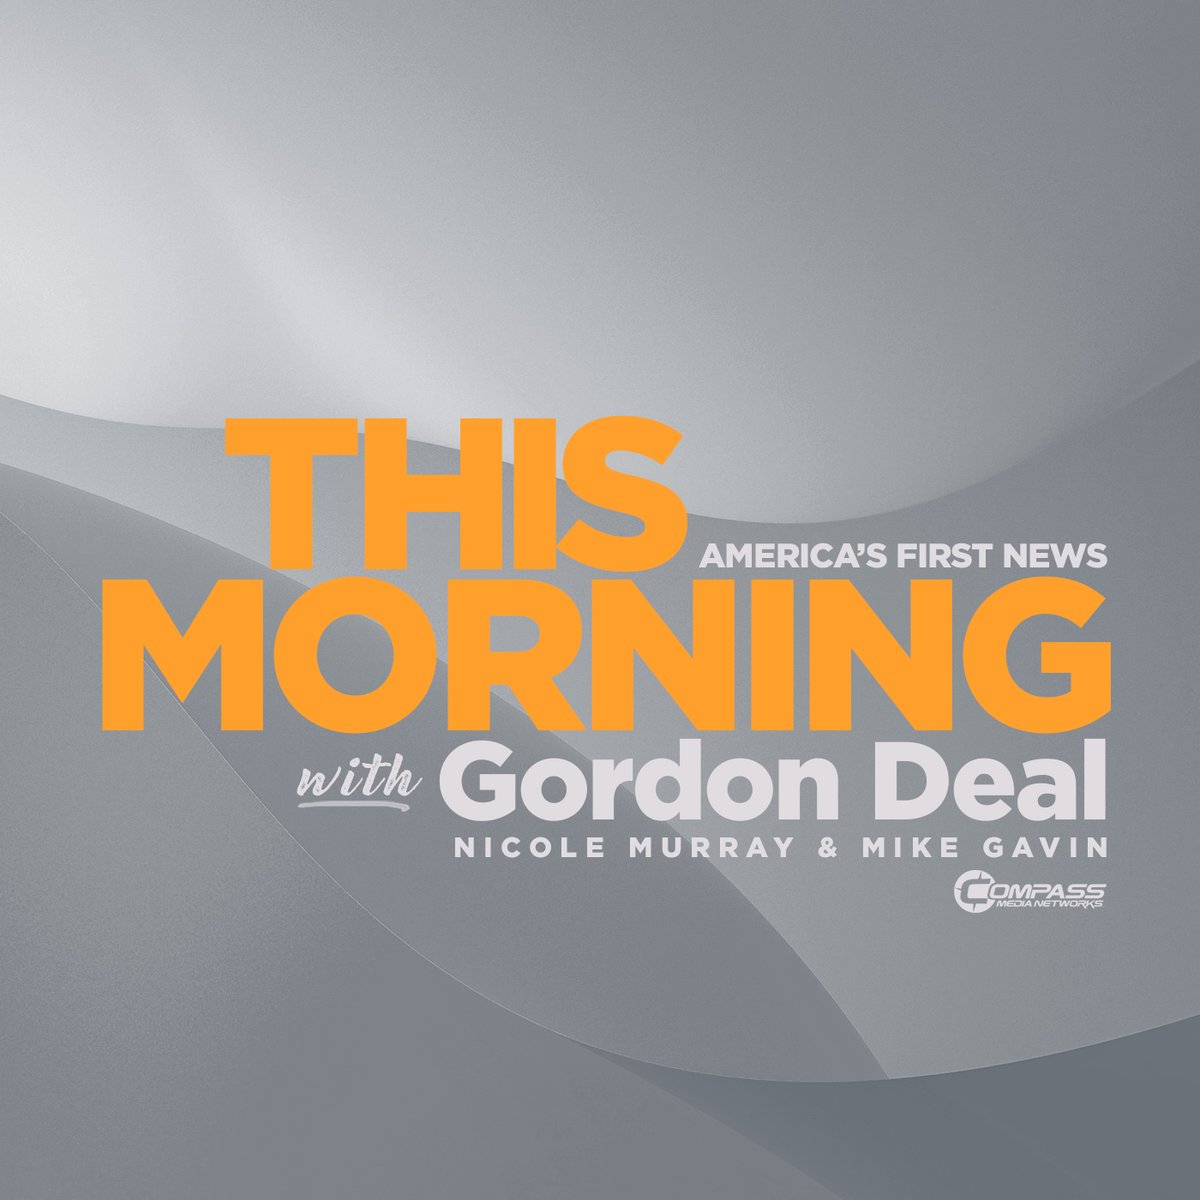 Defense Attorney Jorge Vela breaks down how the Judge in Donald Trump's hush money trial is handling such a high-profile client. @GordonDeal #AmericasFirstNews thismorningwithgordondeal.com/n/bqmmgv